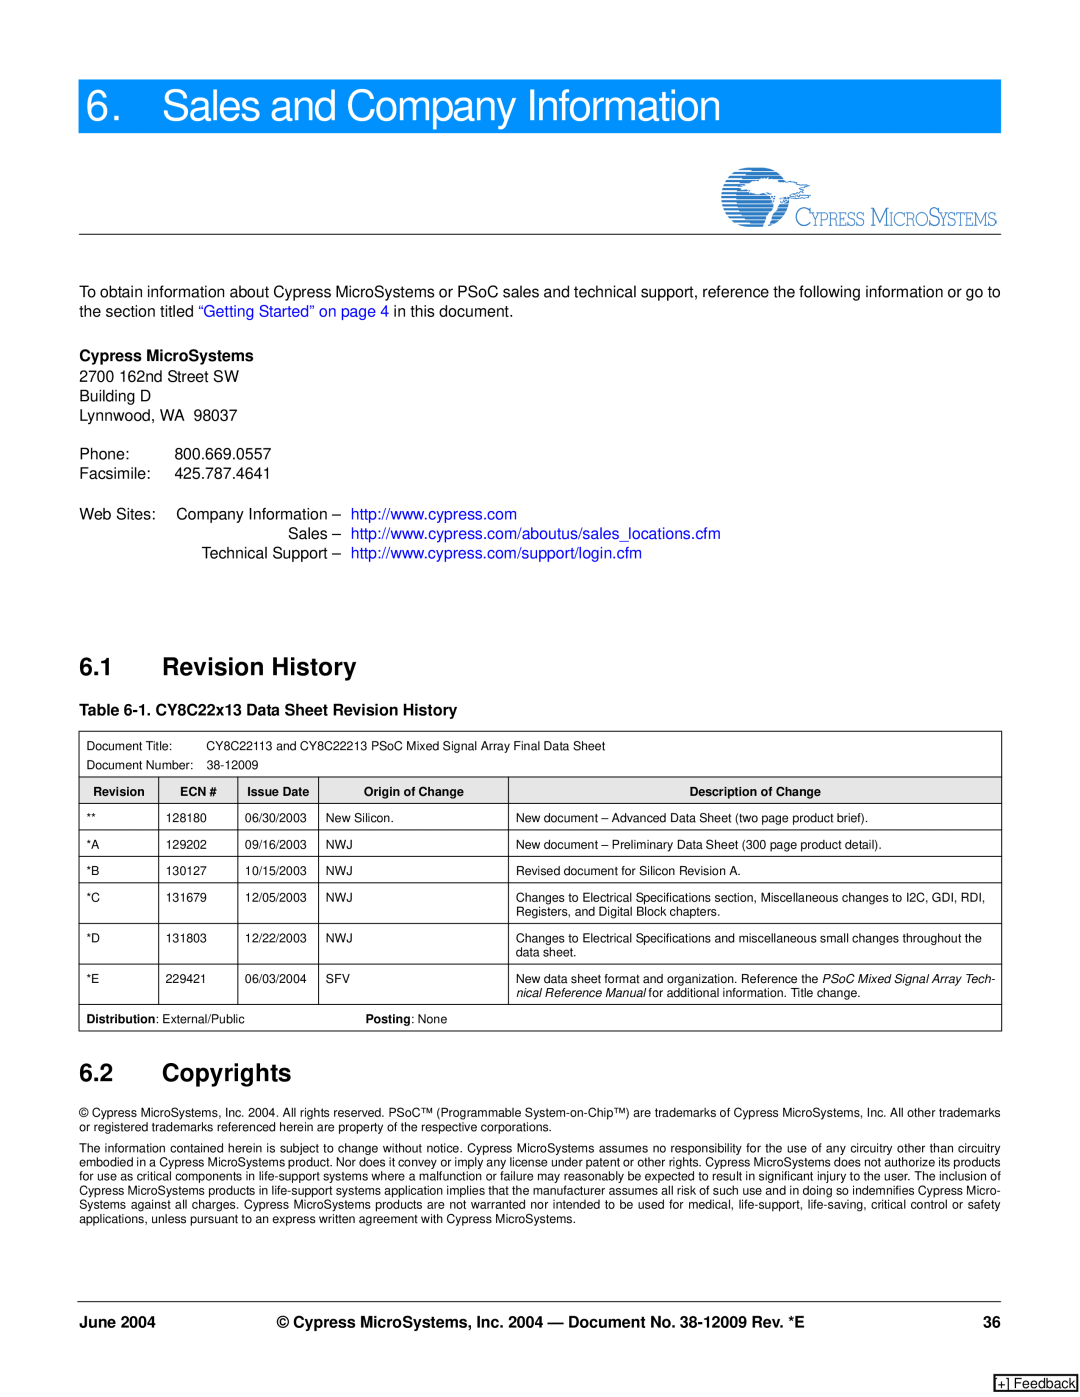 Cypress CY8C22113, CY8C22213 manual Sales and Company Information, Revision History, Copyrights, Cypress MicroSystems, June 